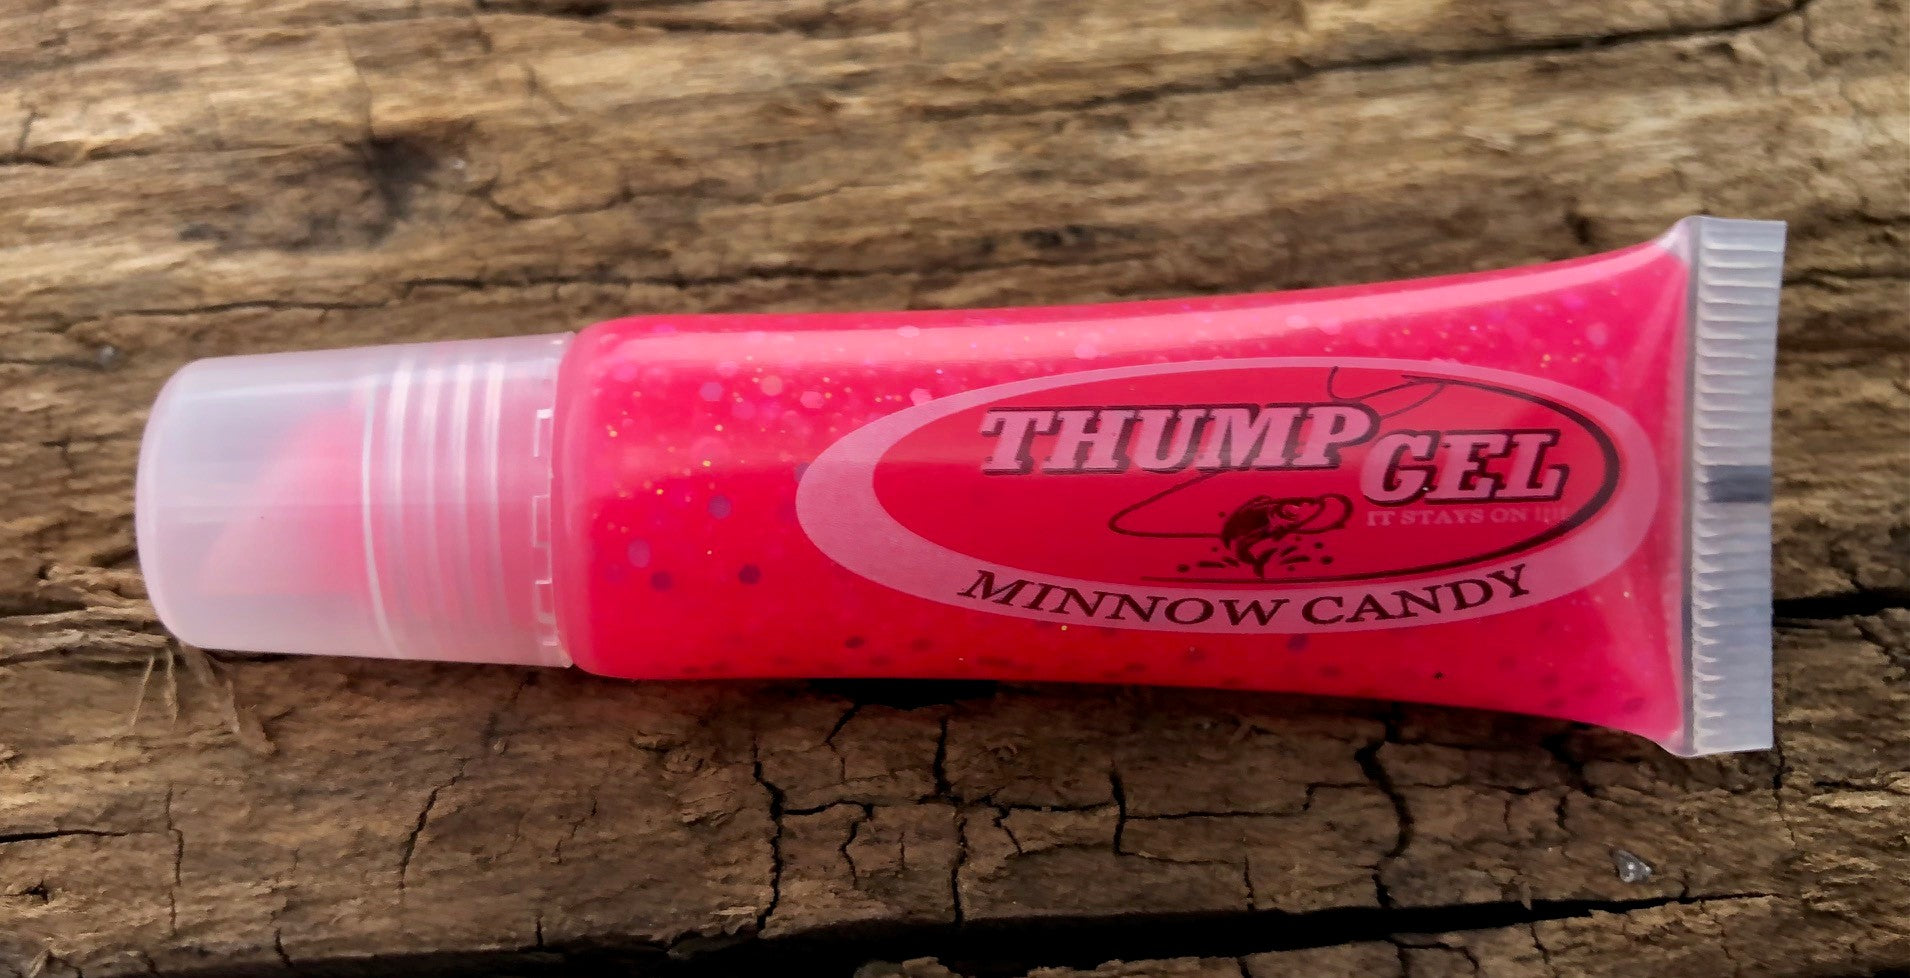 Minnow Candy Fish Attractant – THUMP GEL